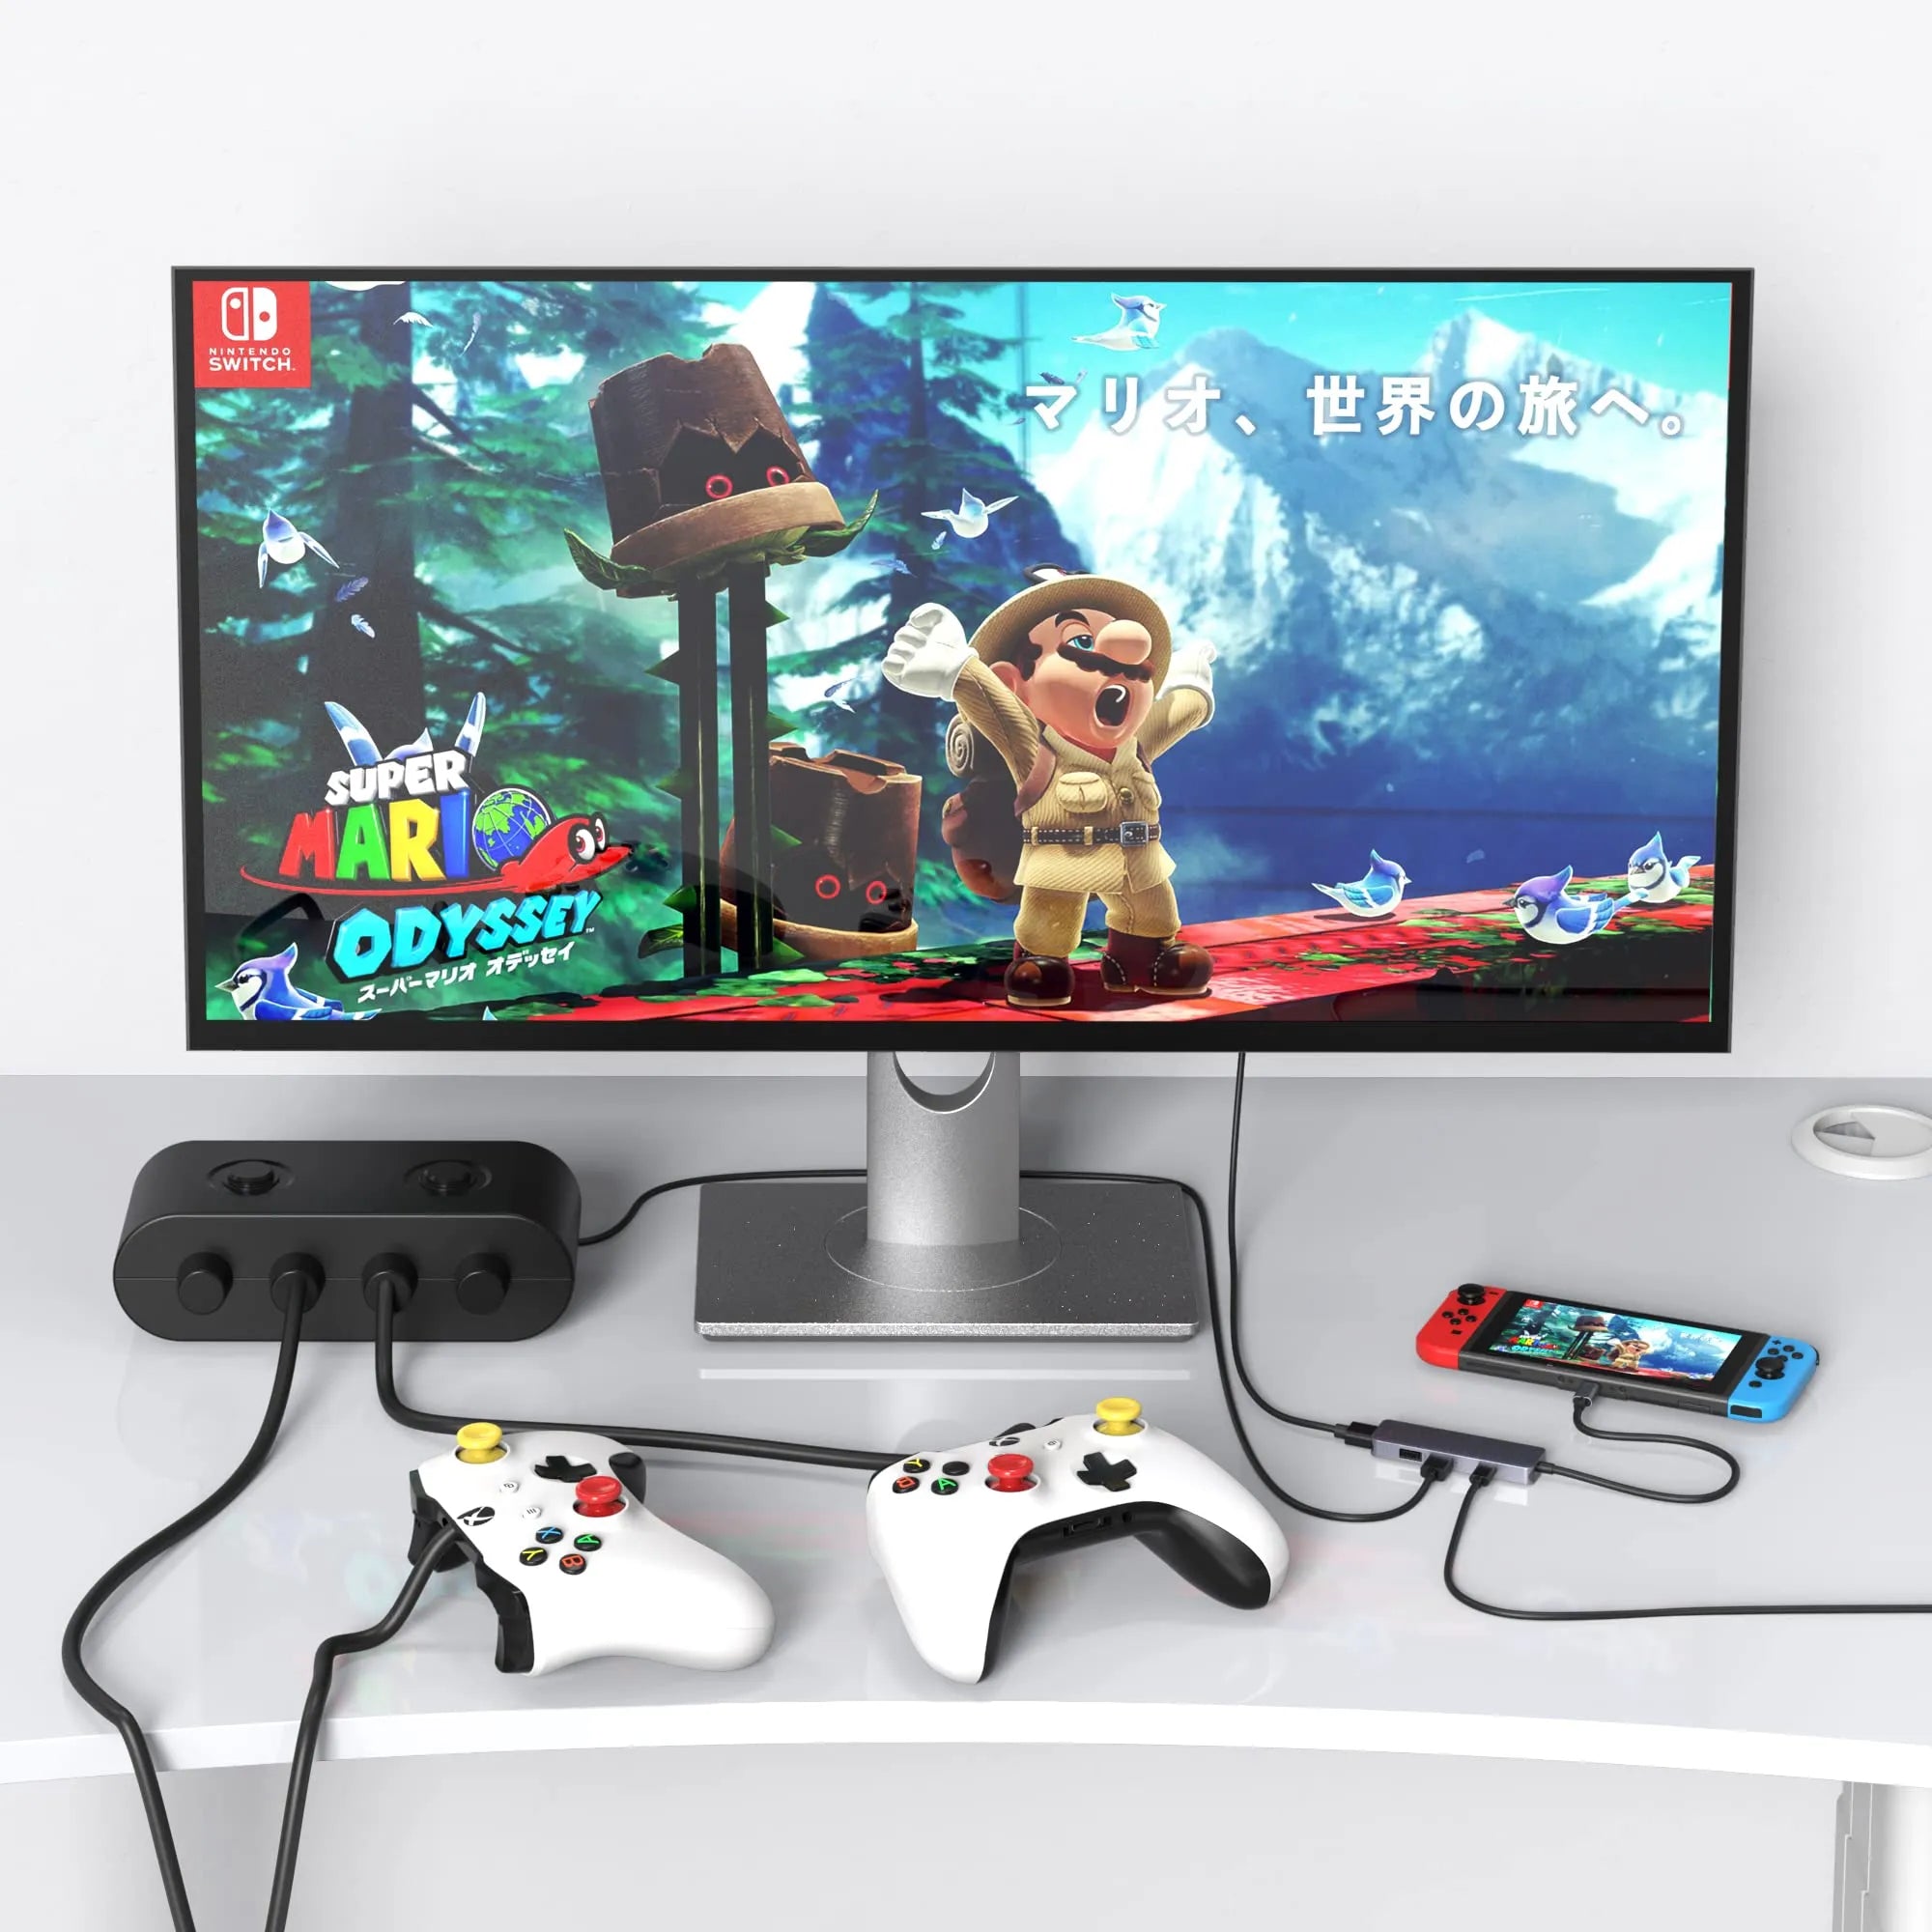 Switch HDMI Adapter Hub Dock, TV Docking Station for Nintendo Switch 4K USB  C HDMI Hub Cable for Switch, Compatible with Mac Book Pro Samsung Galaxy